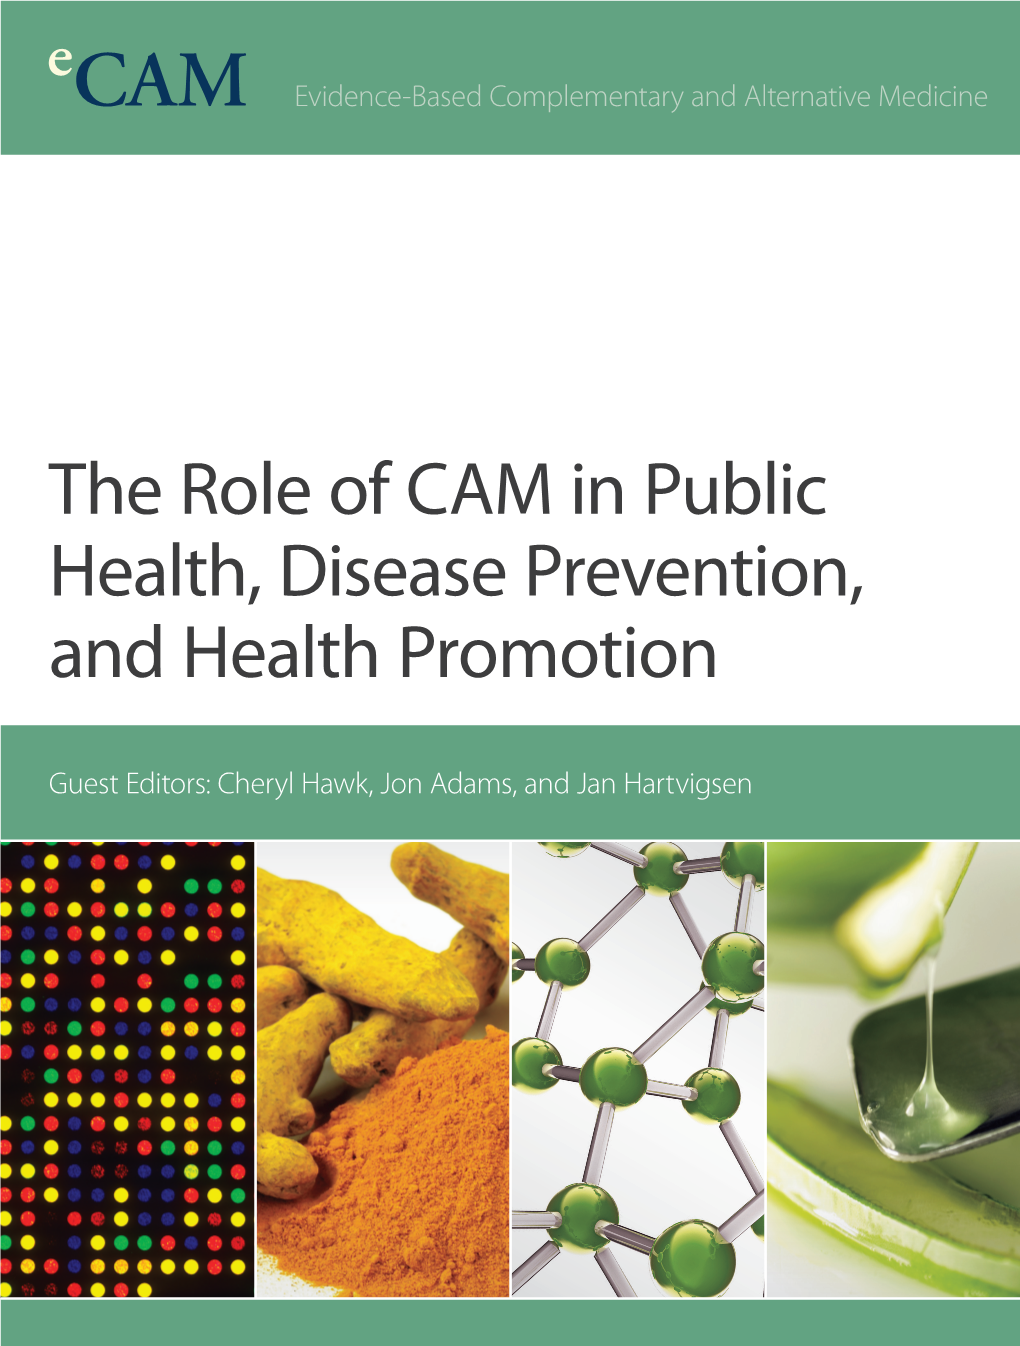 The Role of CAM in Public Health, Disease Prevention, and Health Promotion